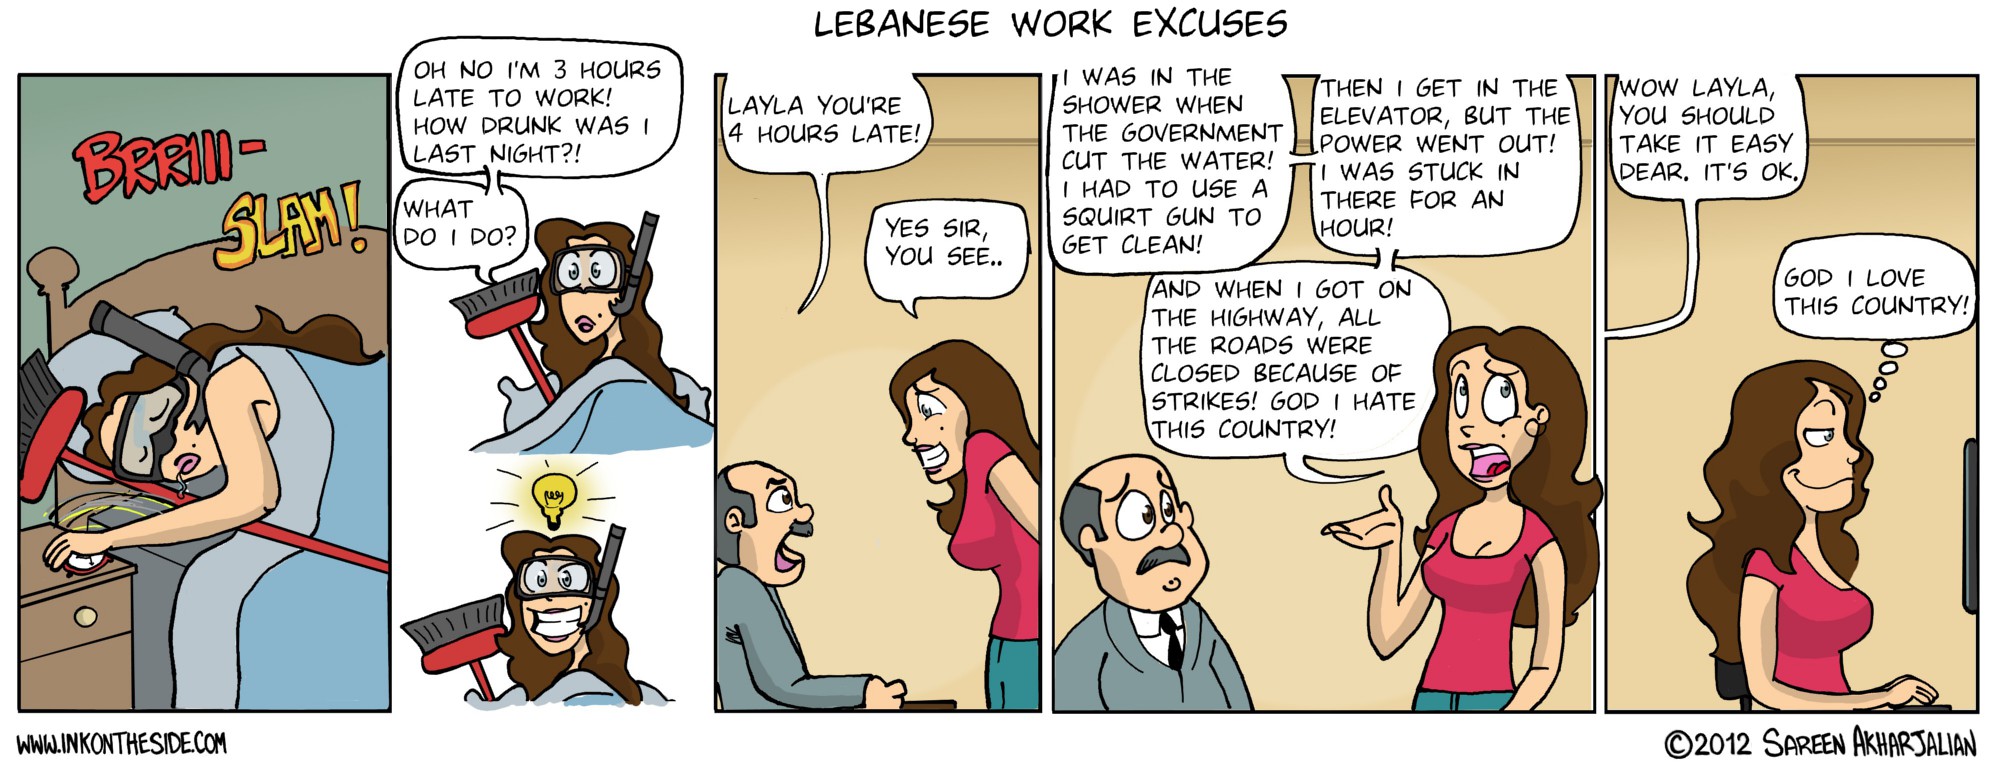 Lebanese Excuses with their Boss